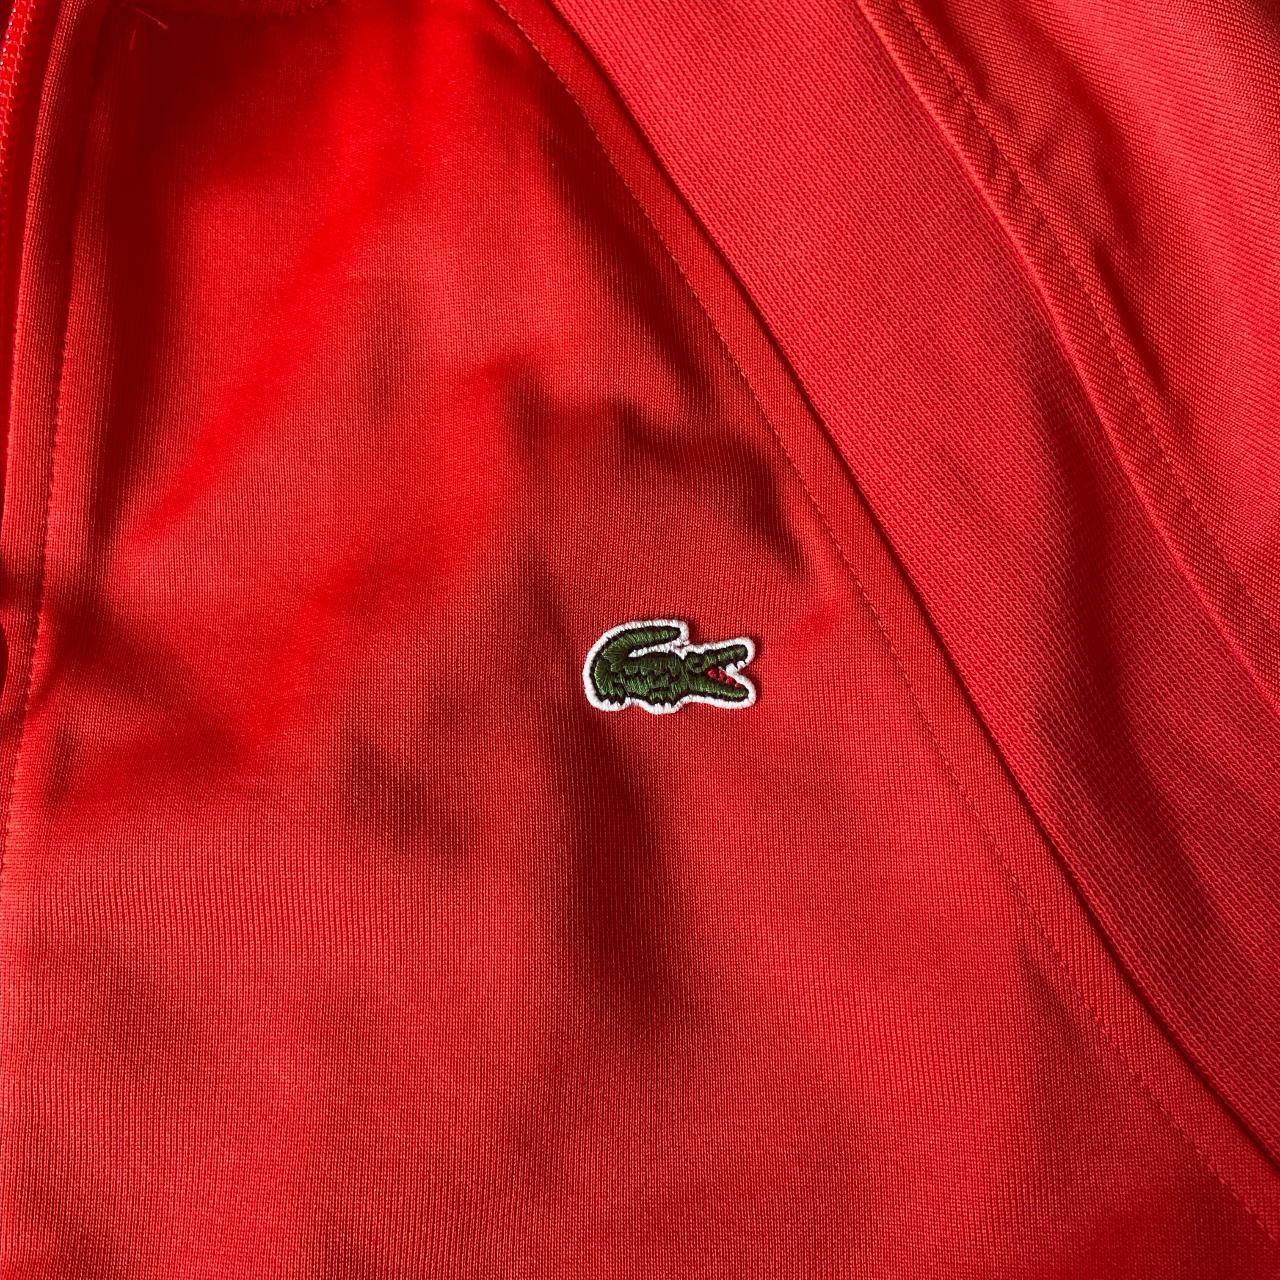 Lacoste Live Women's Red Jacket (6)